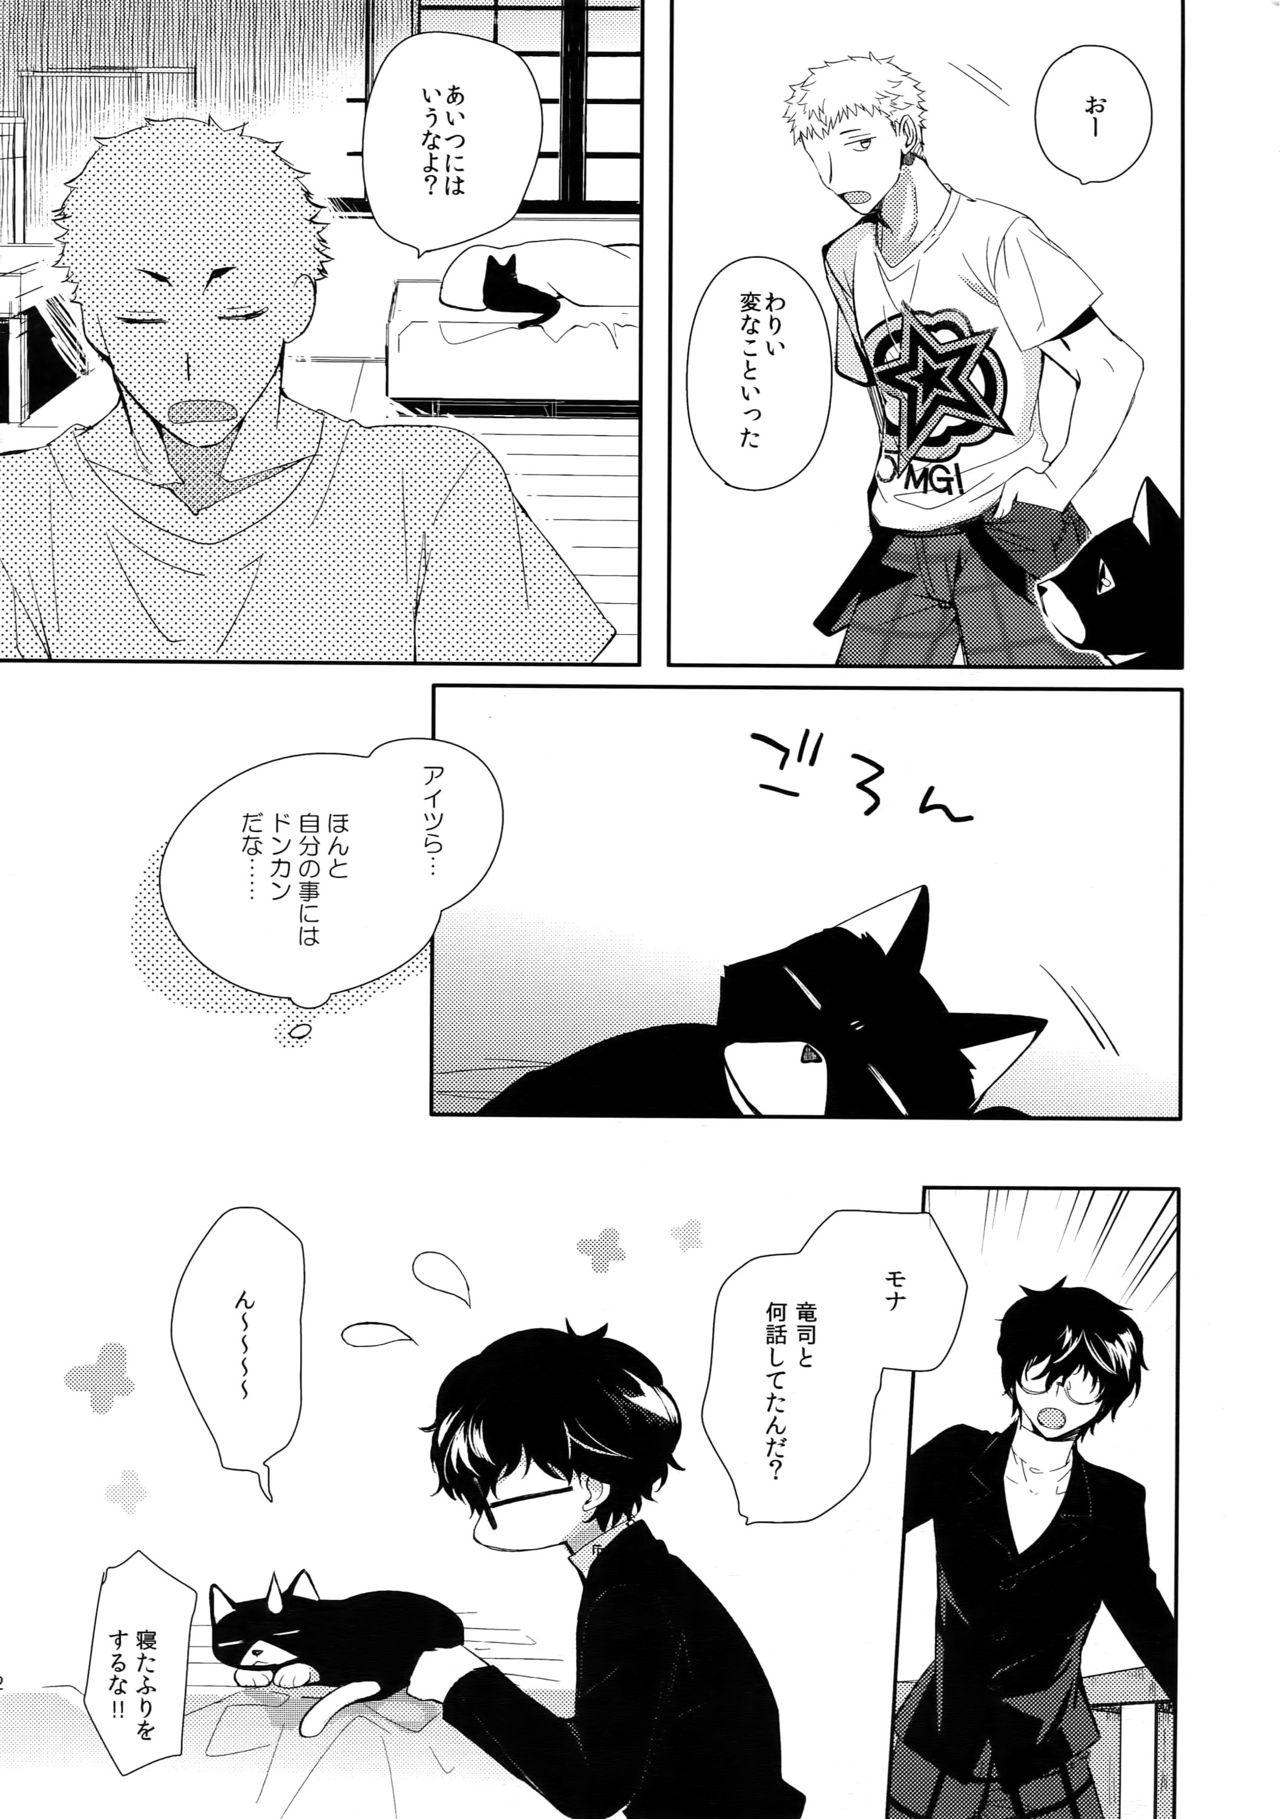 Czech You're My Hero - Persona 5 Indonesian - Page 11